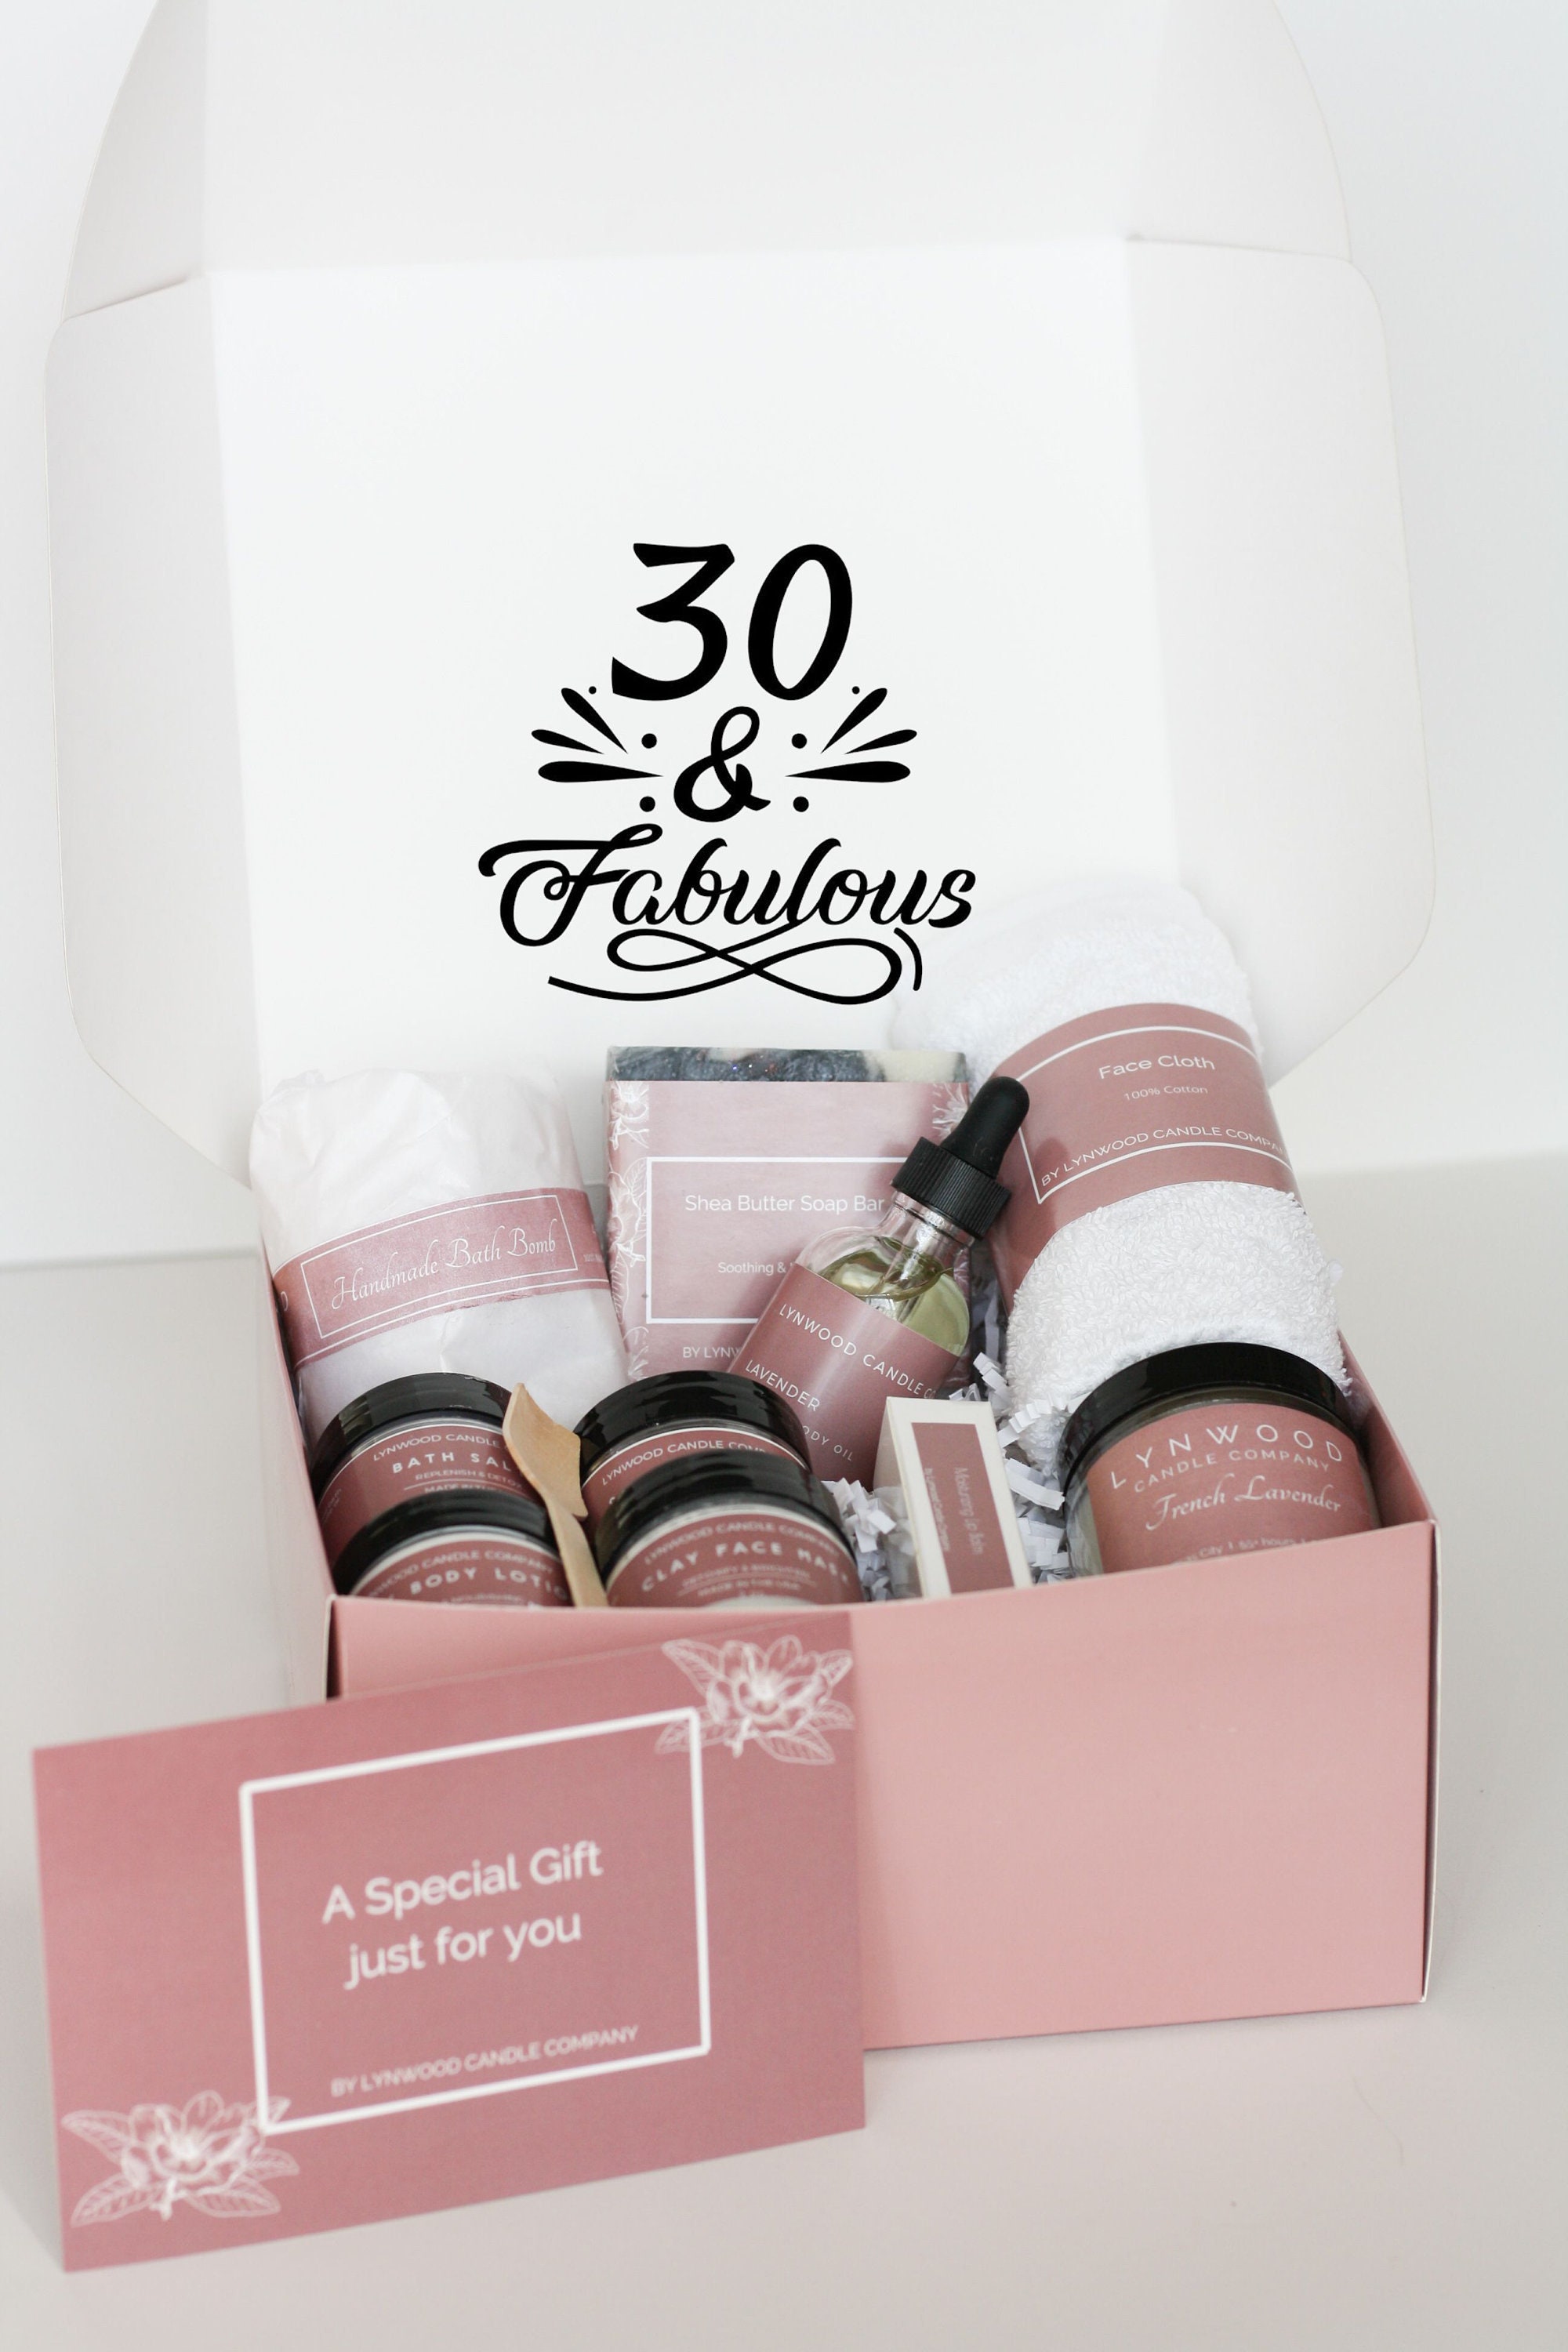 The Ultimate Gift Guide For Women In Their 30s - GenThirty  30th birthday  present ideas for women, Cool gifts for women, 29th birthday gifts